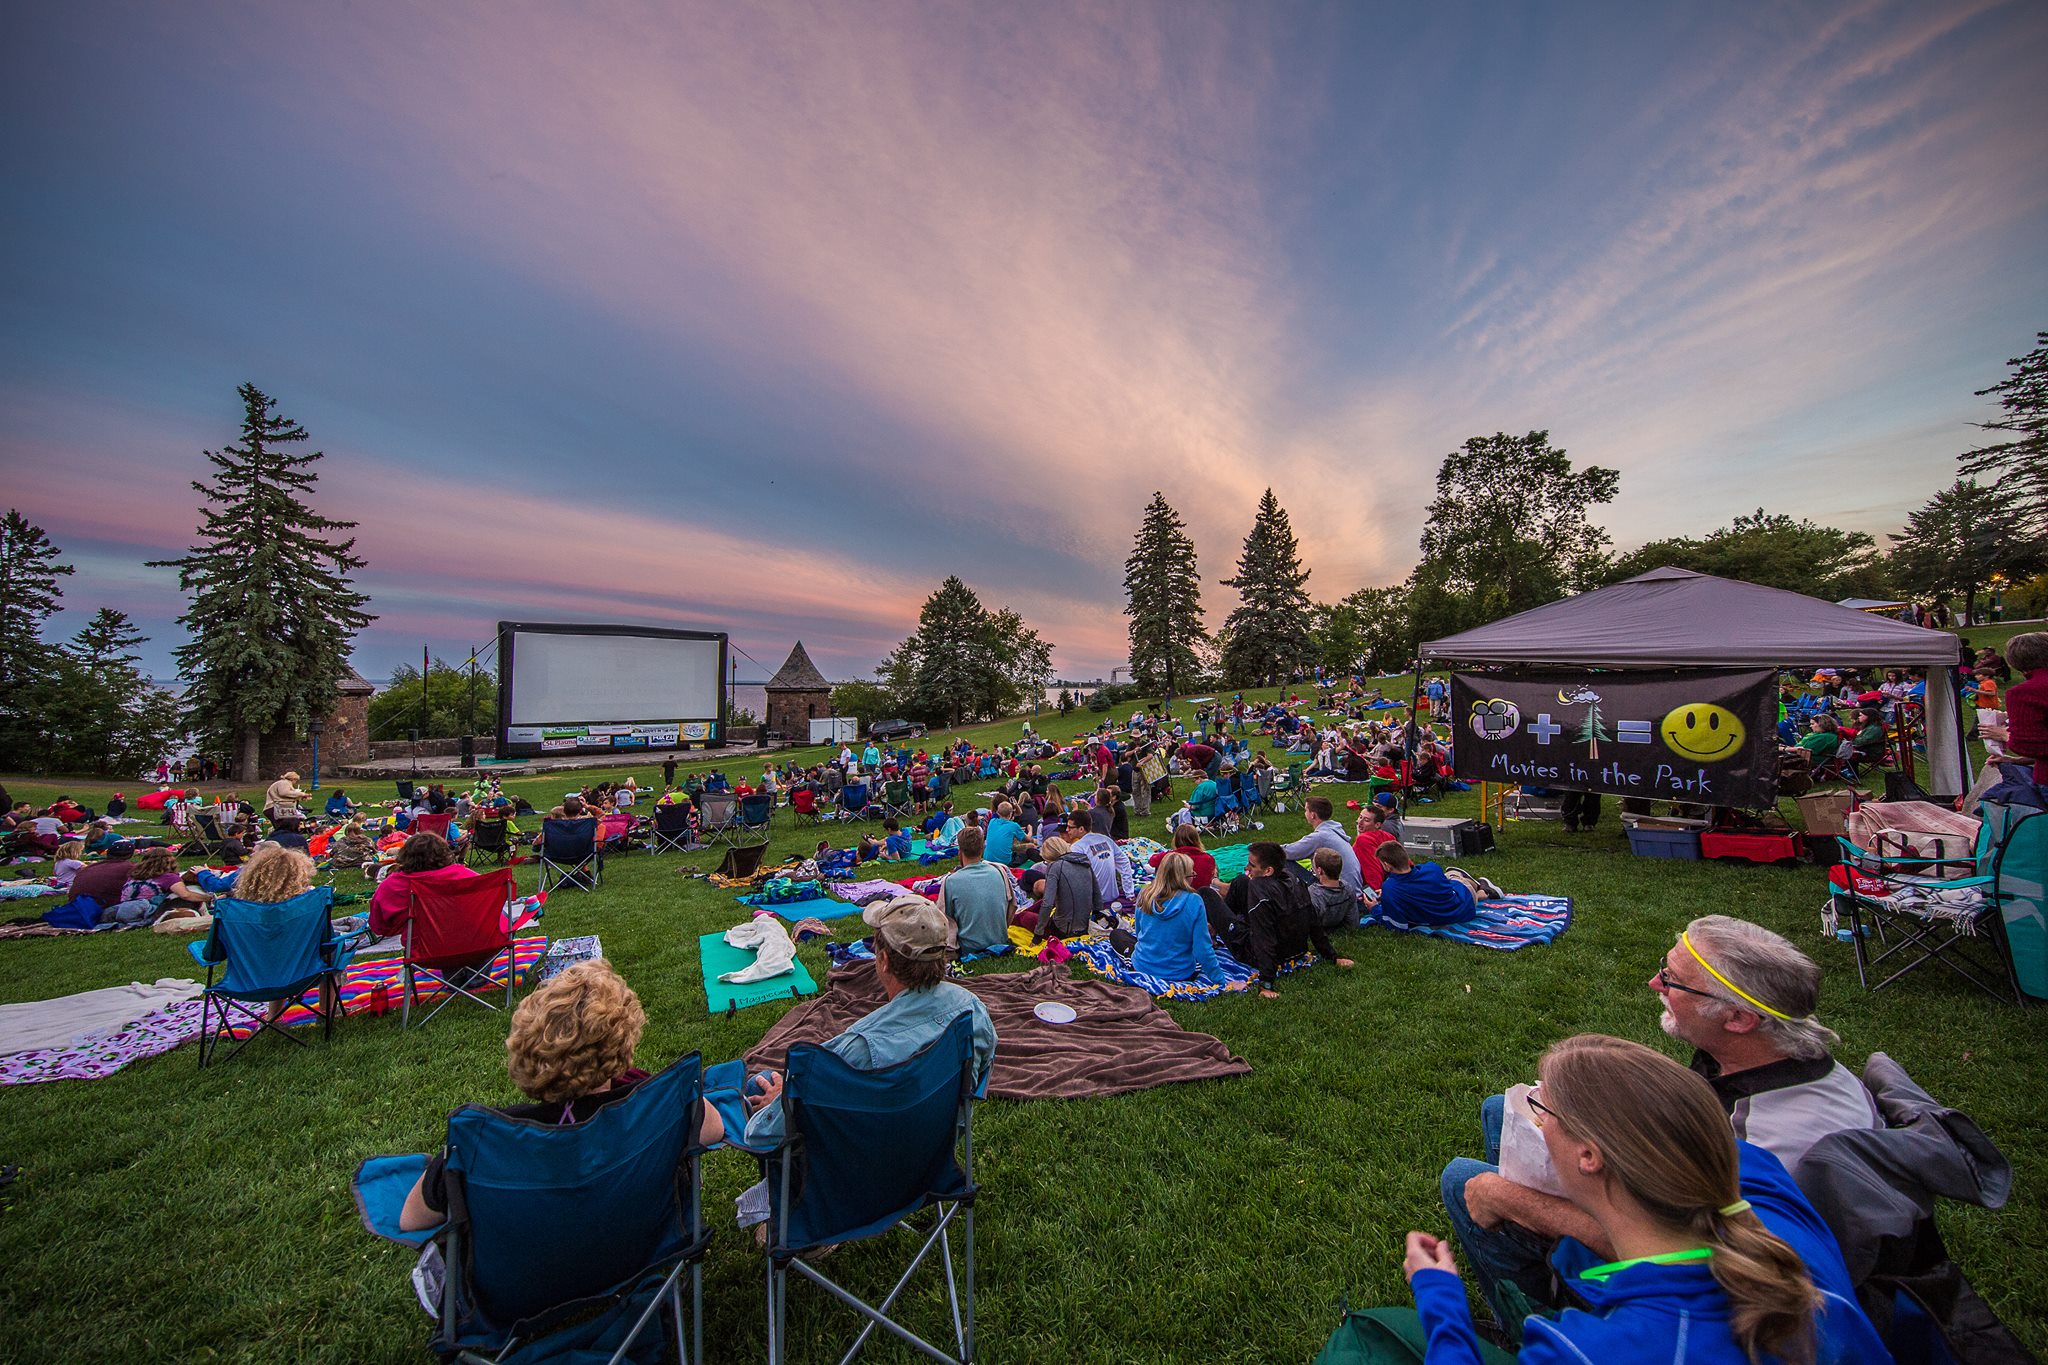 The 2018 Movies in the Park series kicks off this Friday!